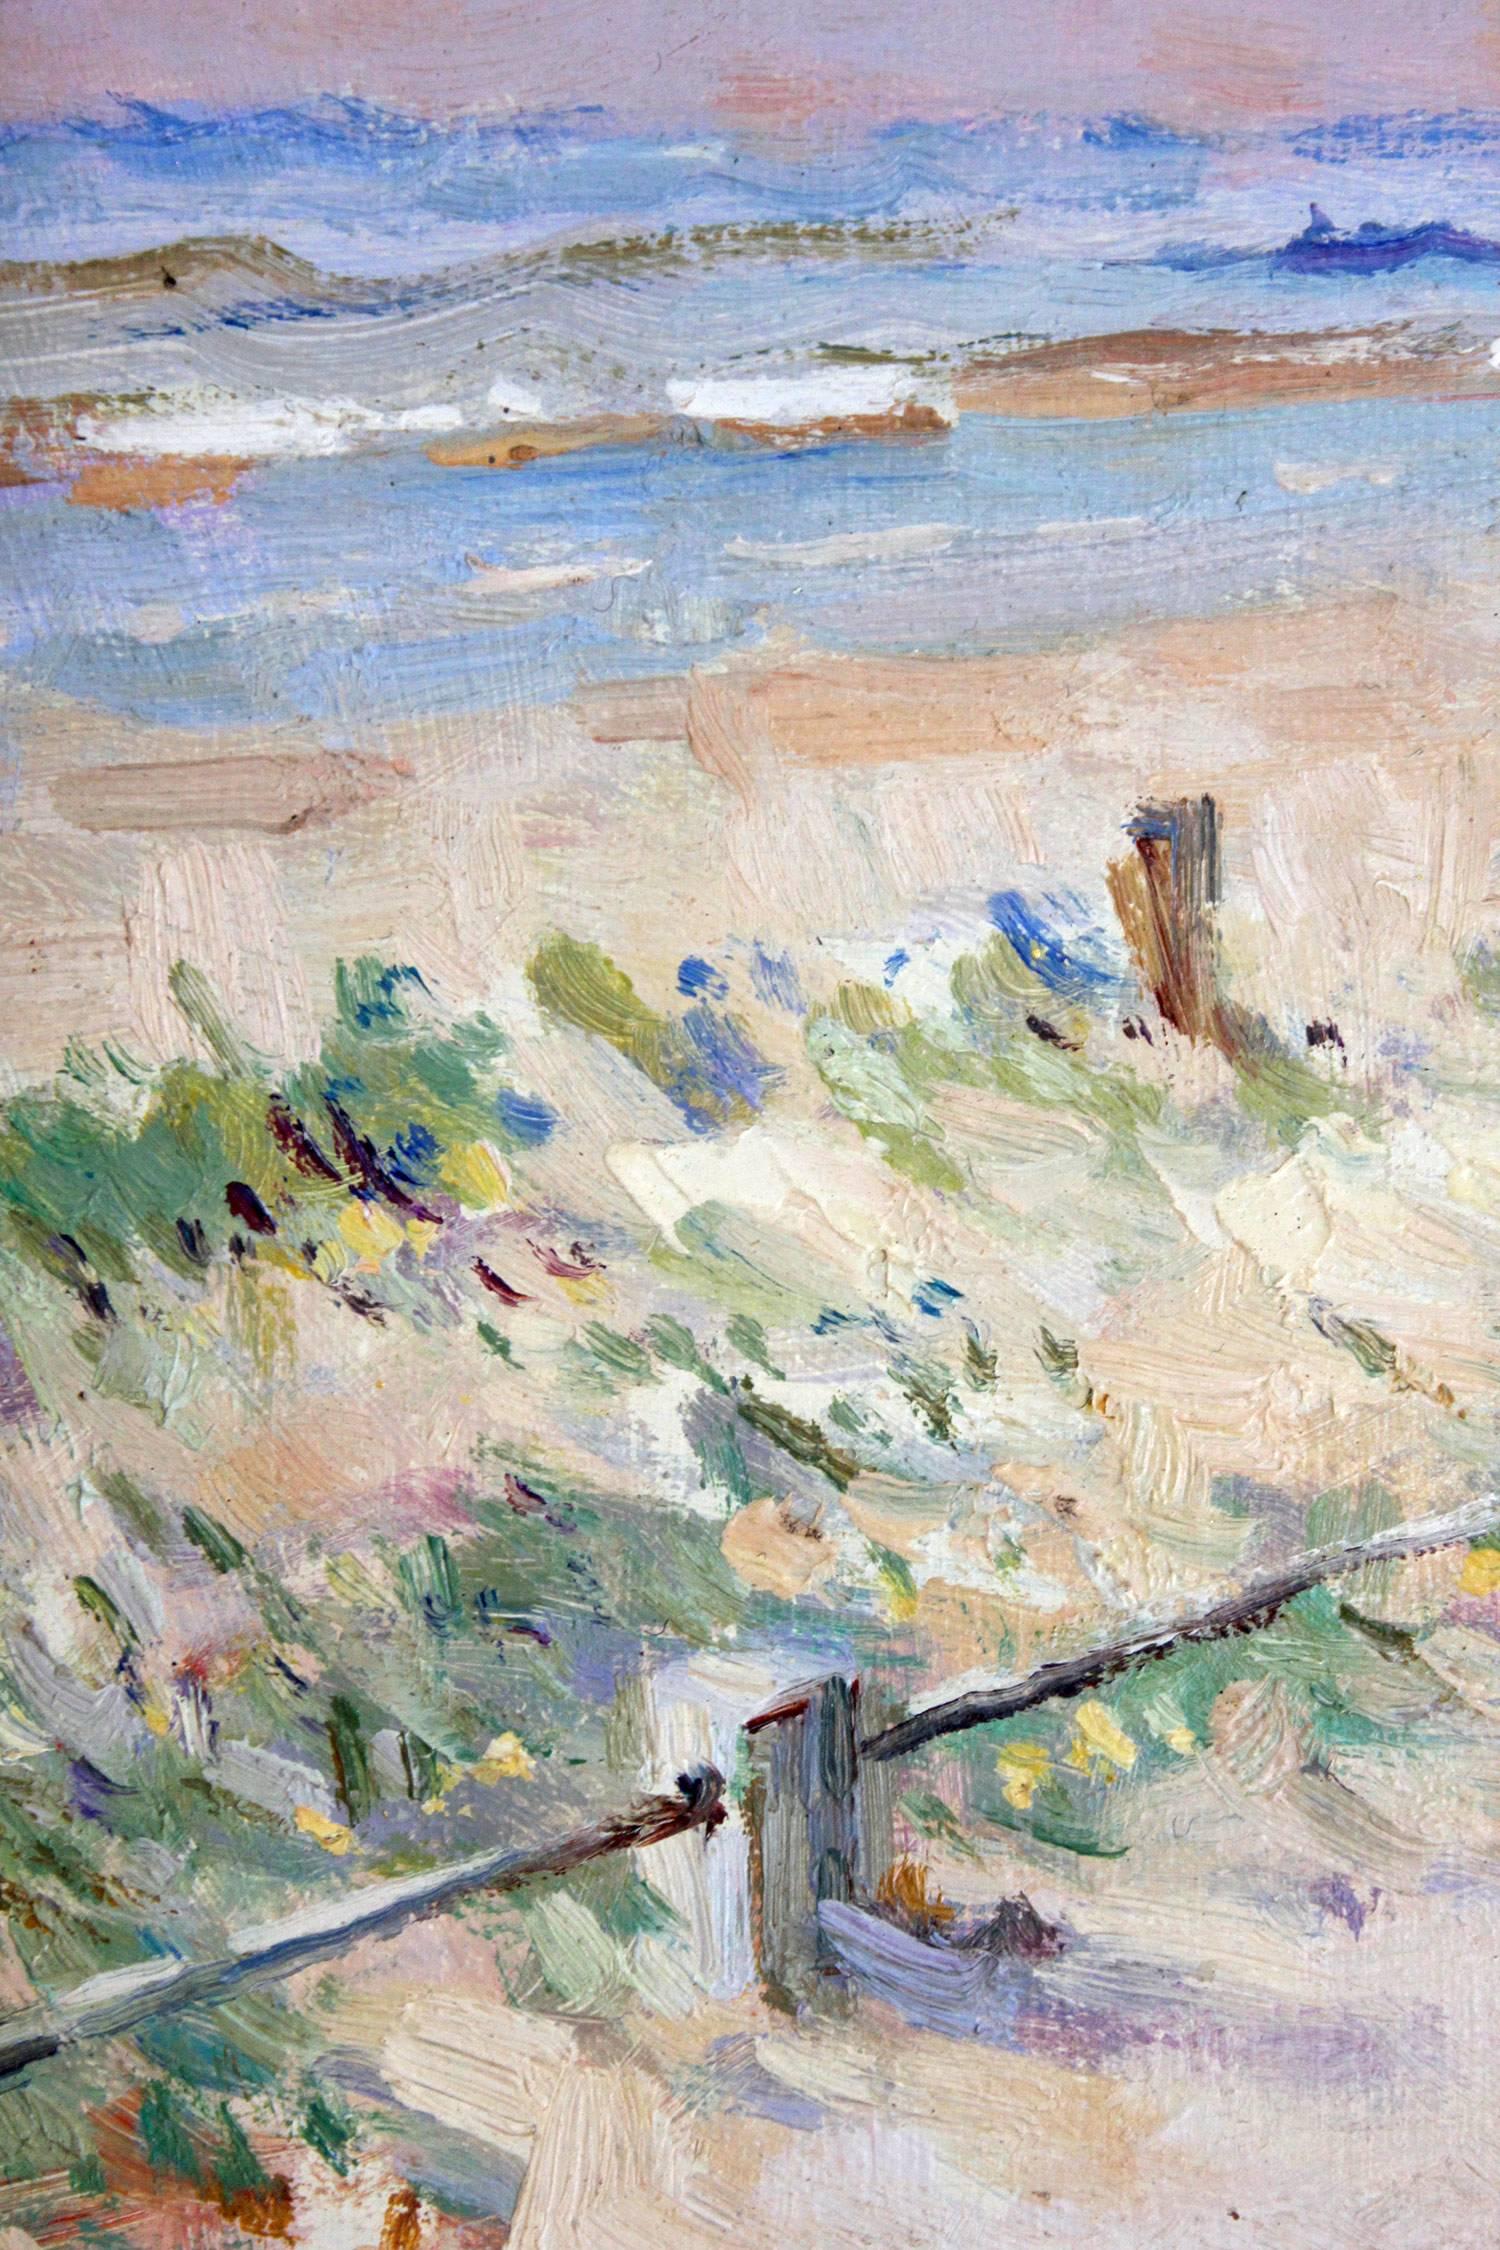 This captivating beach scene from the 20th Century is a wonderful display of Van der Plas's true passion for outdoor genre paintings. The vibrant colors and impressionistic brushwork are done with both whimsey and boldness. This painting depicts